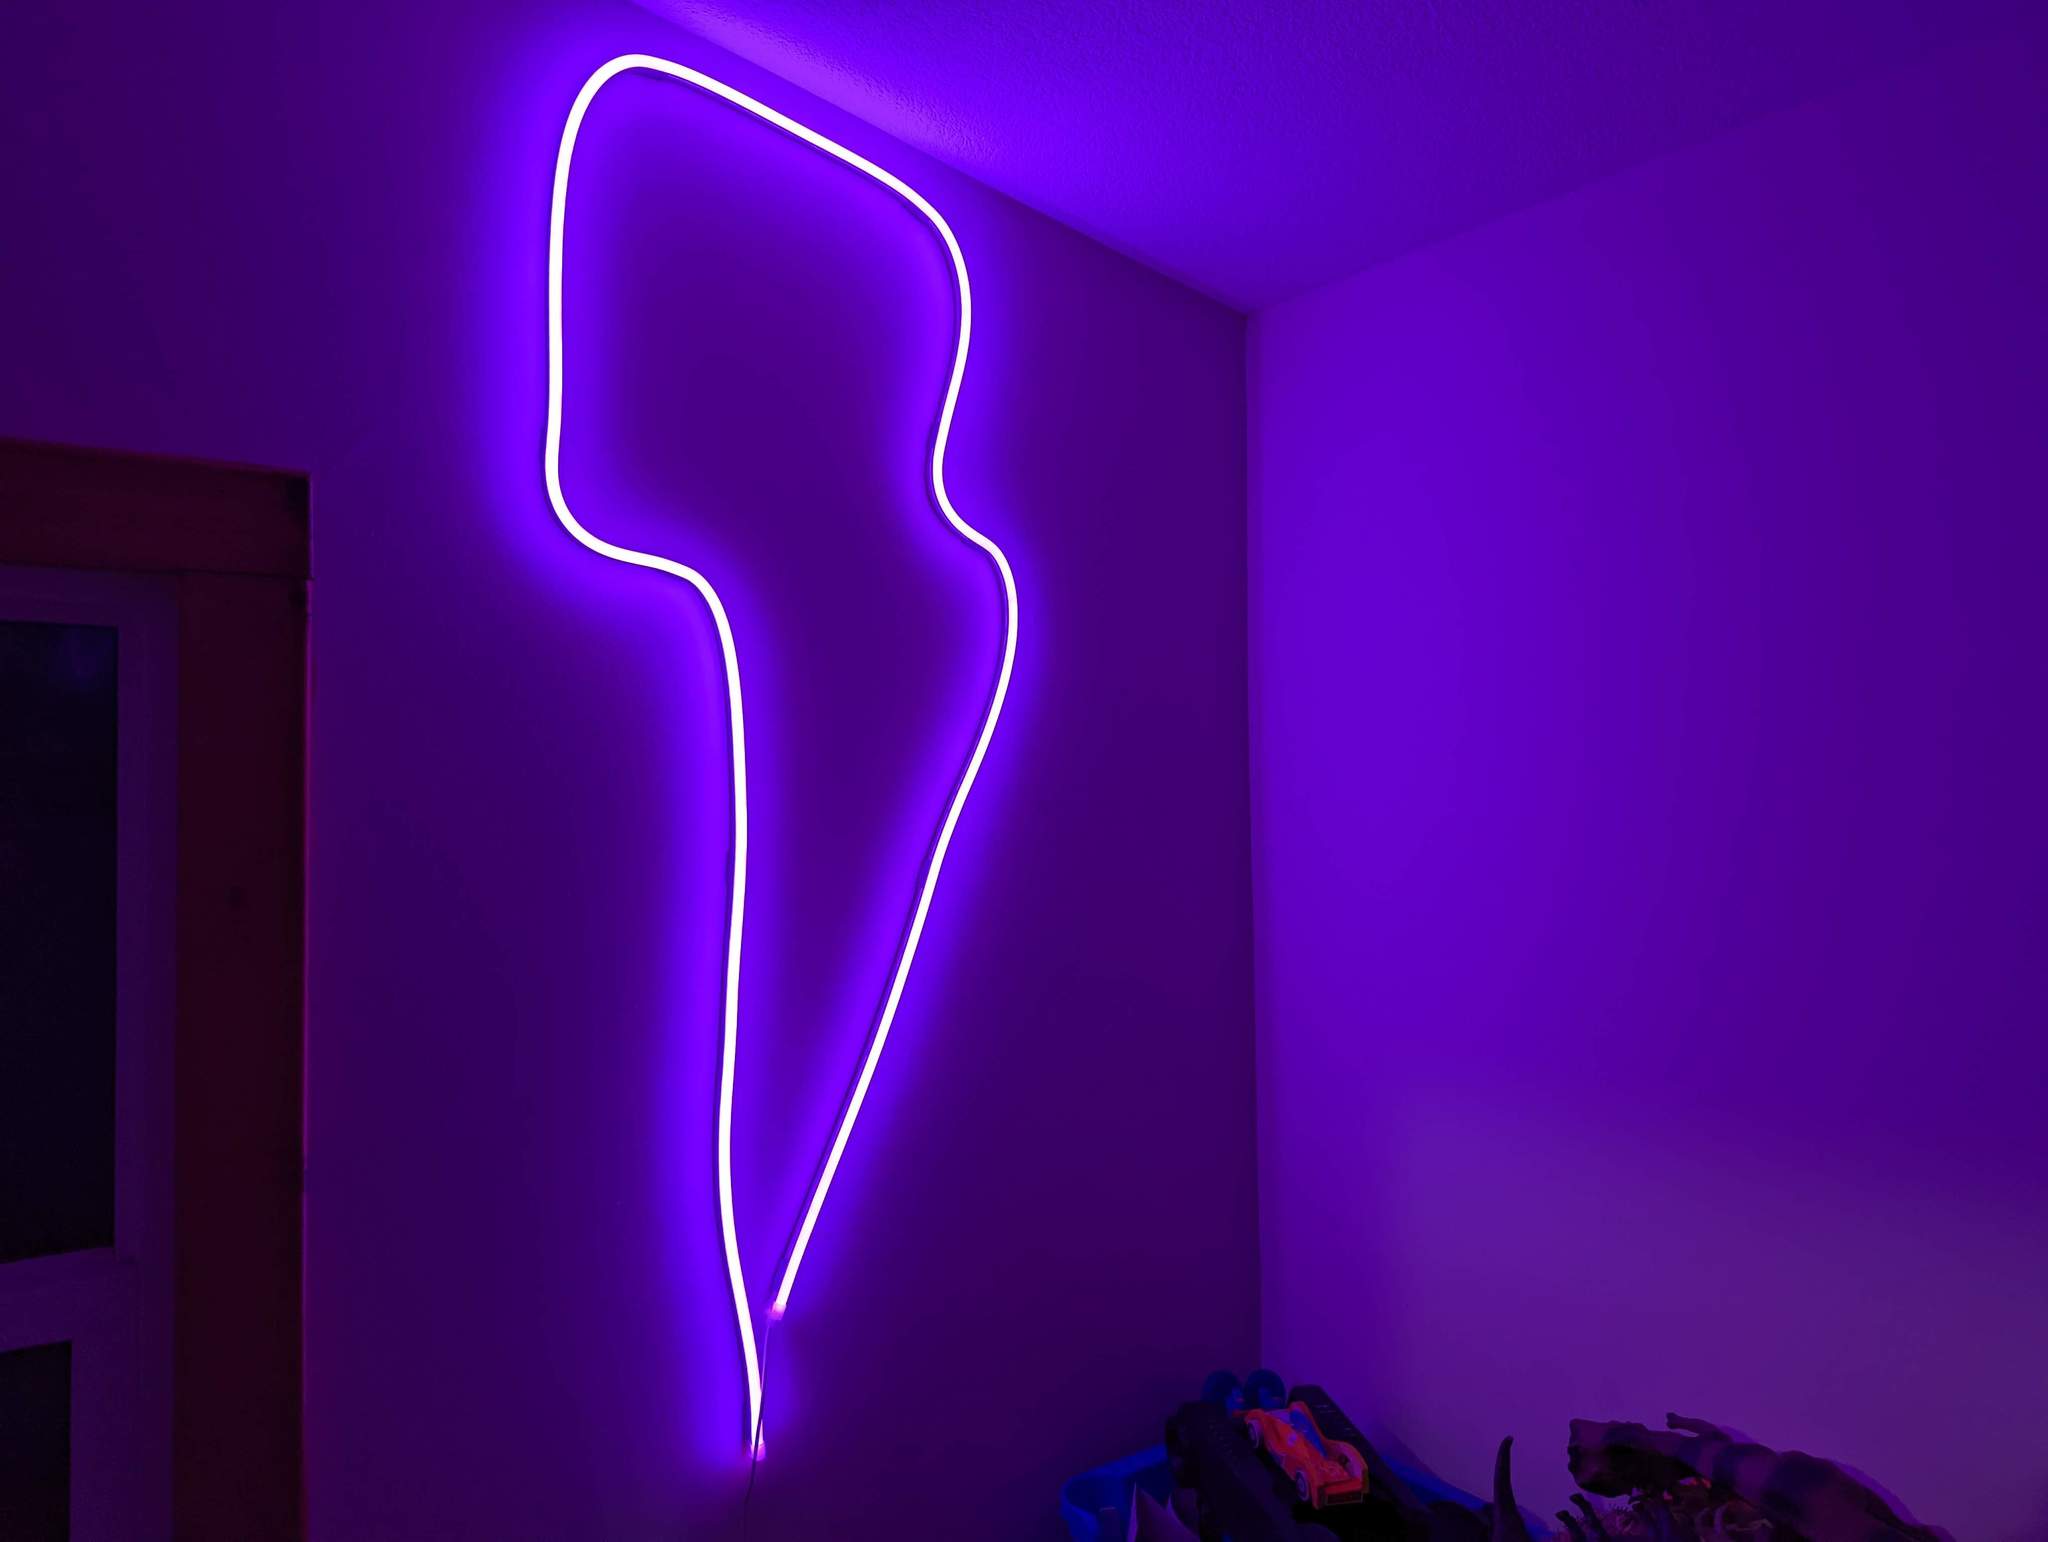 REVIEW: Govee’s Neon LED Strips meet your wishes for a fun wall light